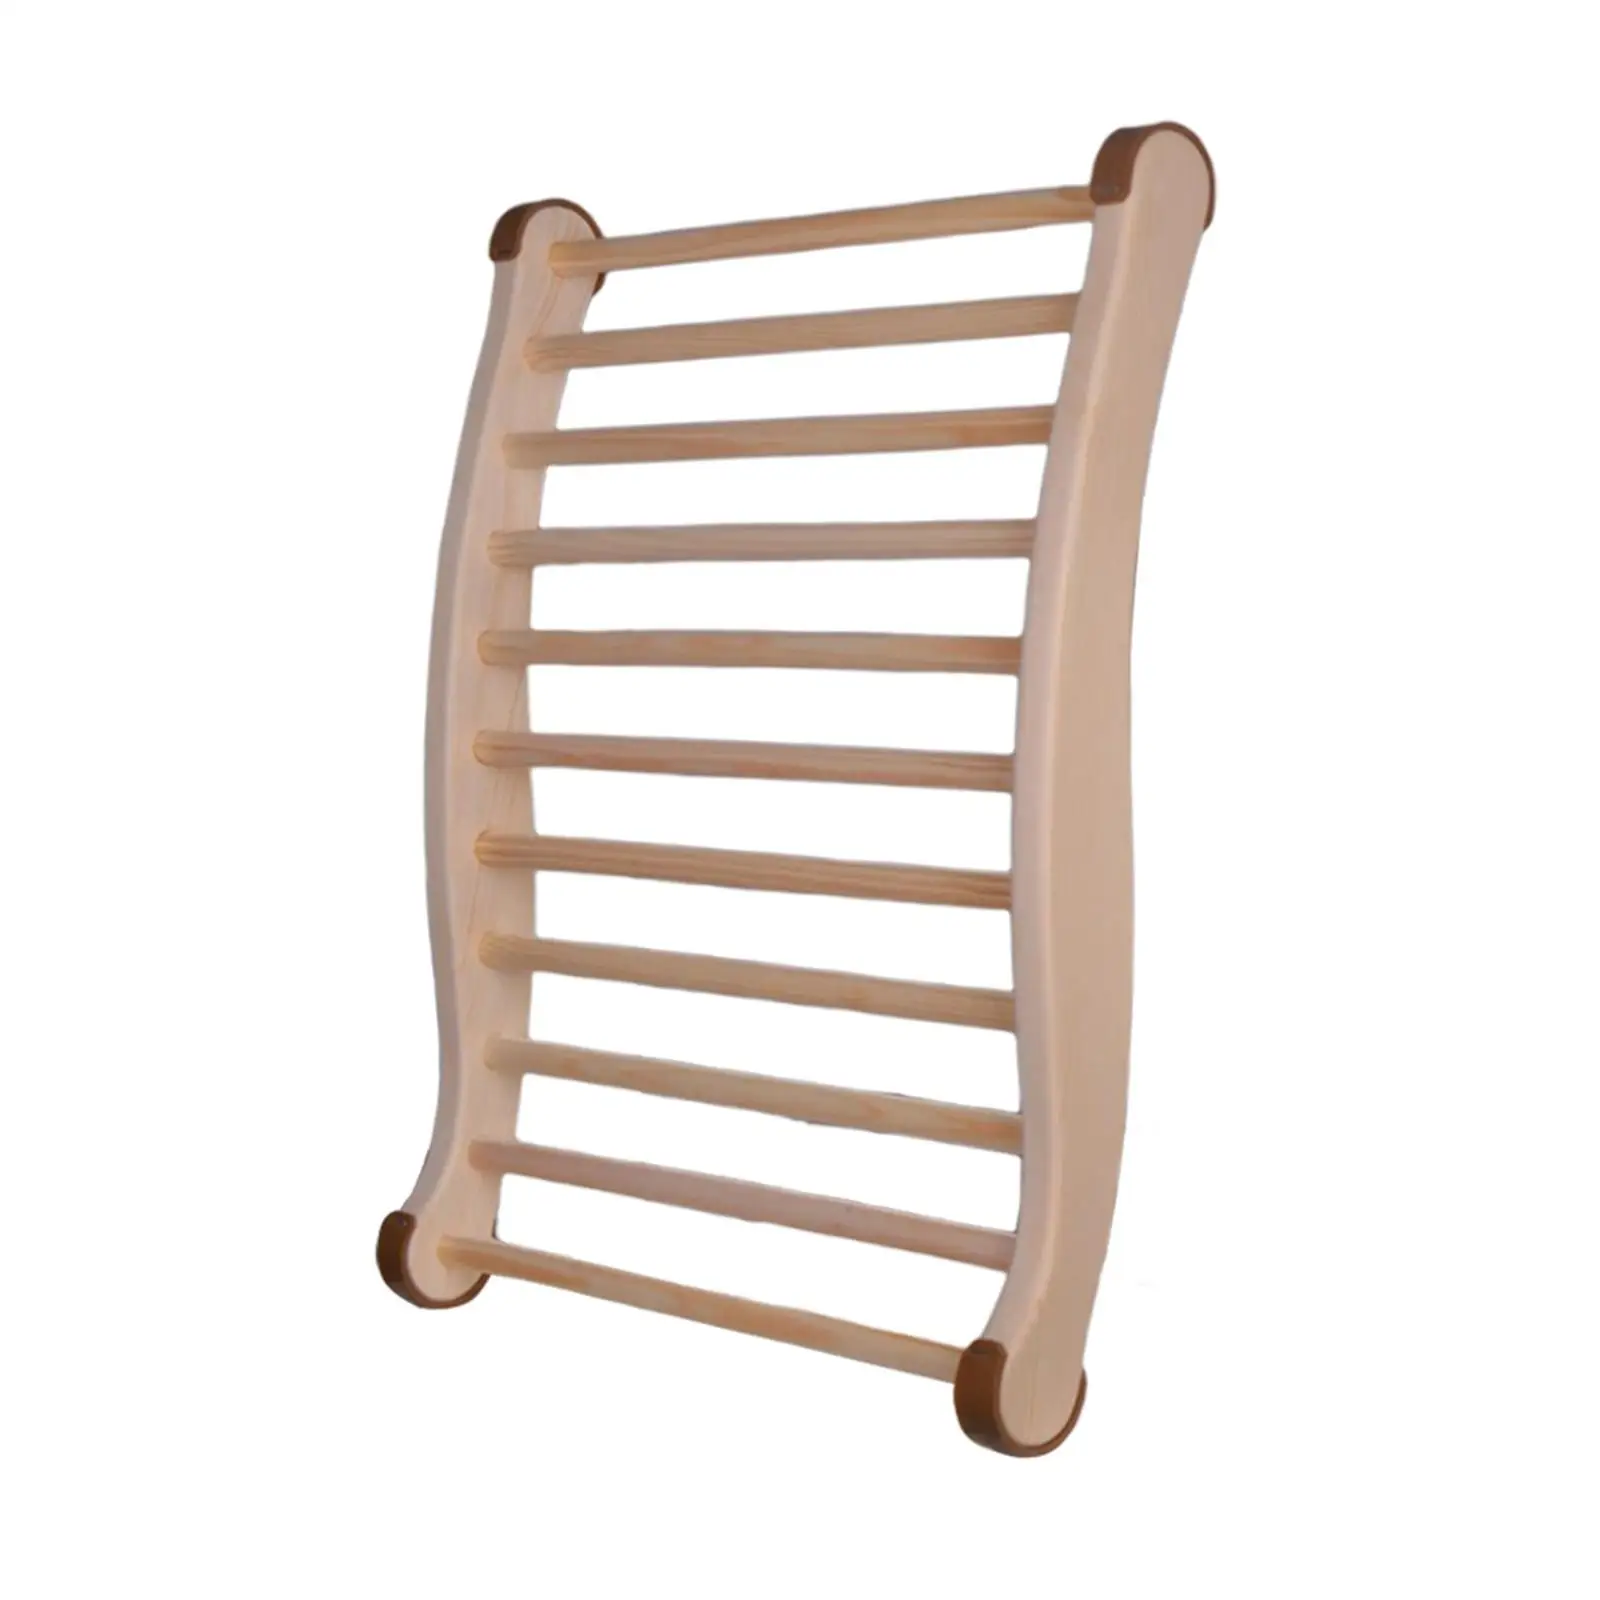 Wooden Curved Cushion Sauna Chair with Sauna Backrest with Ergonomic S-shaped